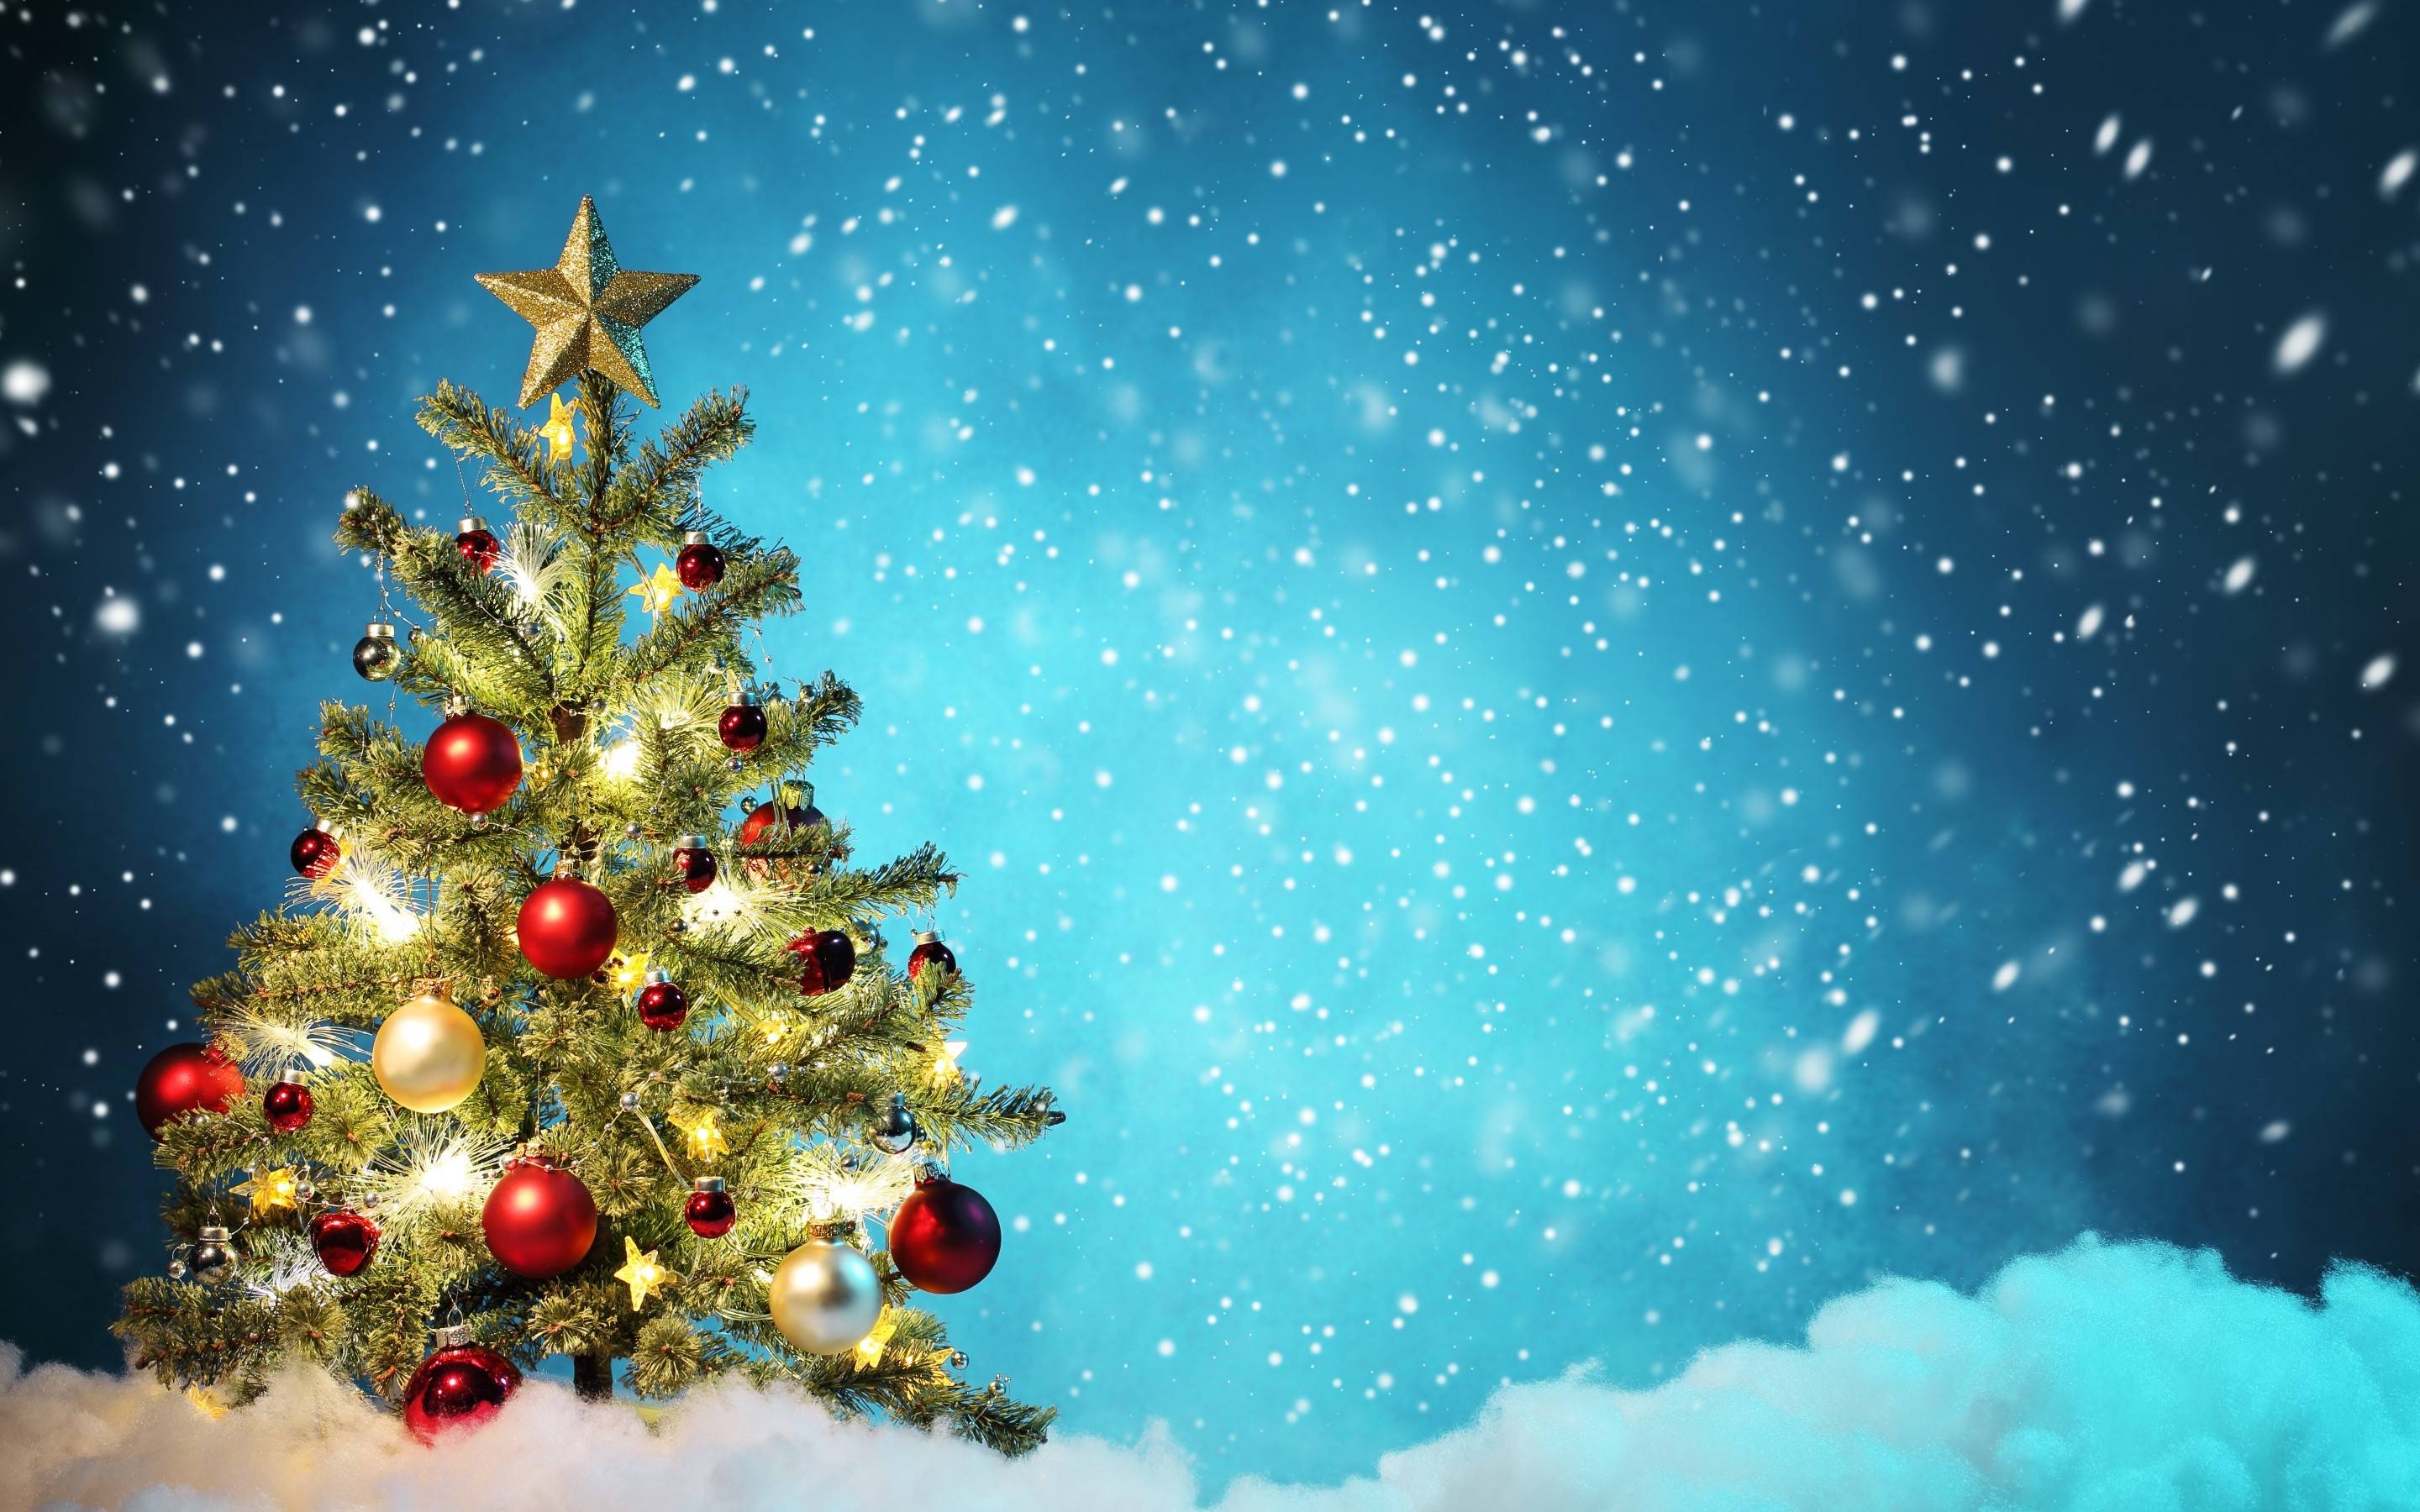 Wallpaper For > Christmas Tree Background Image